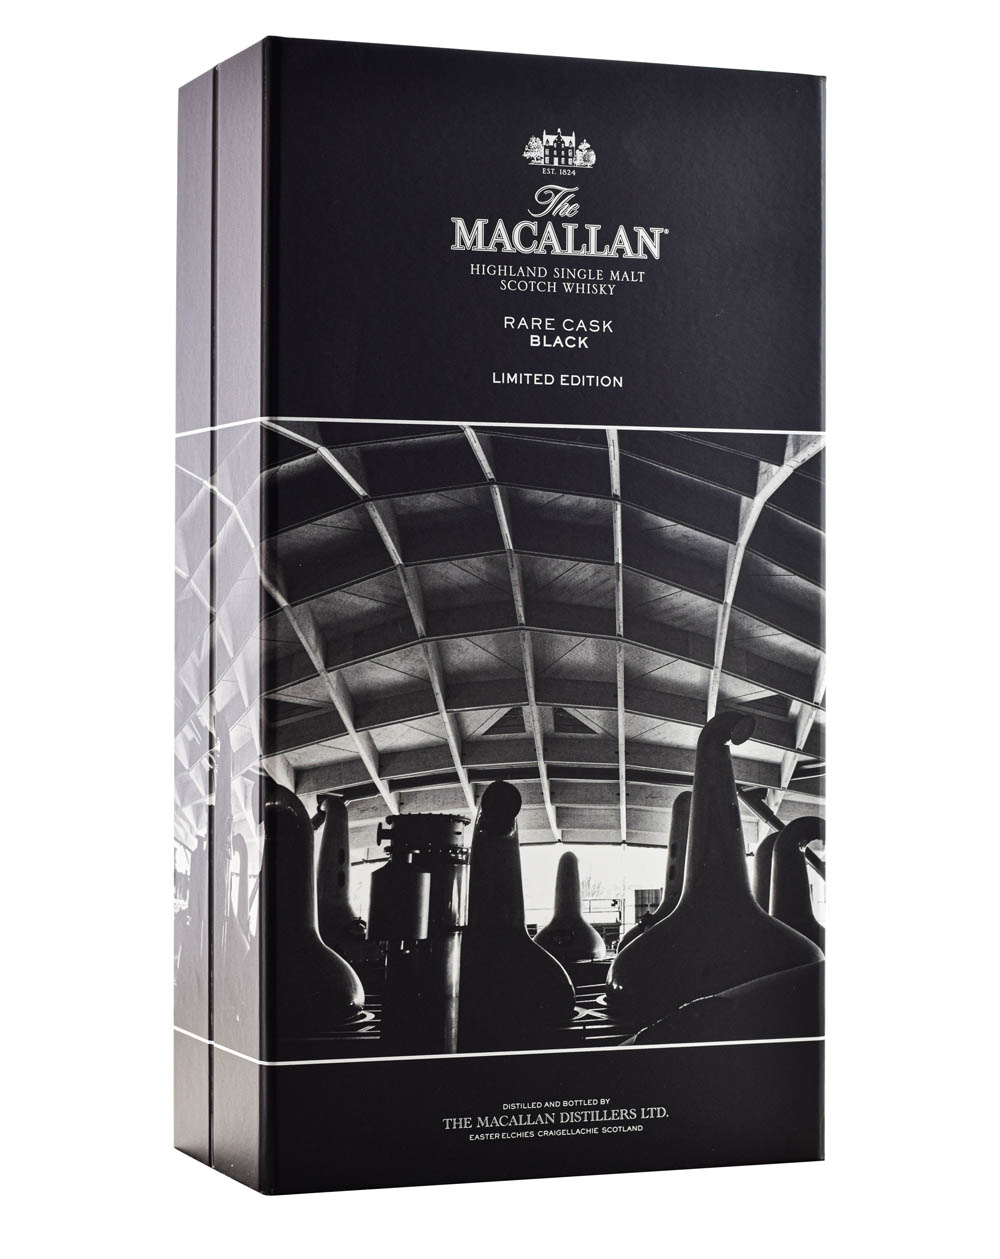 Macallan Rare Cask Black Limited Edition Box Musthave Malts MHM